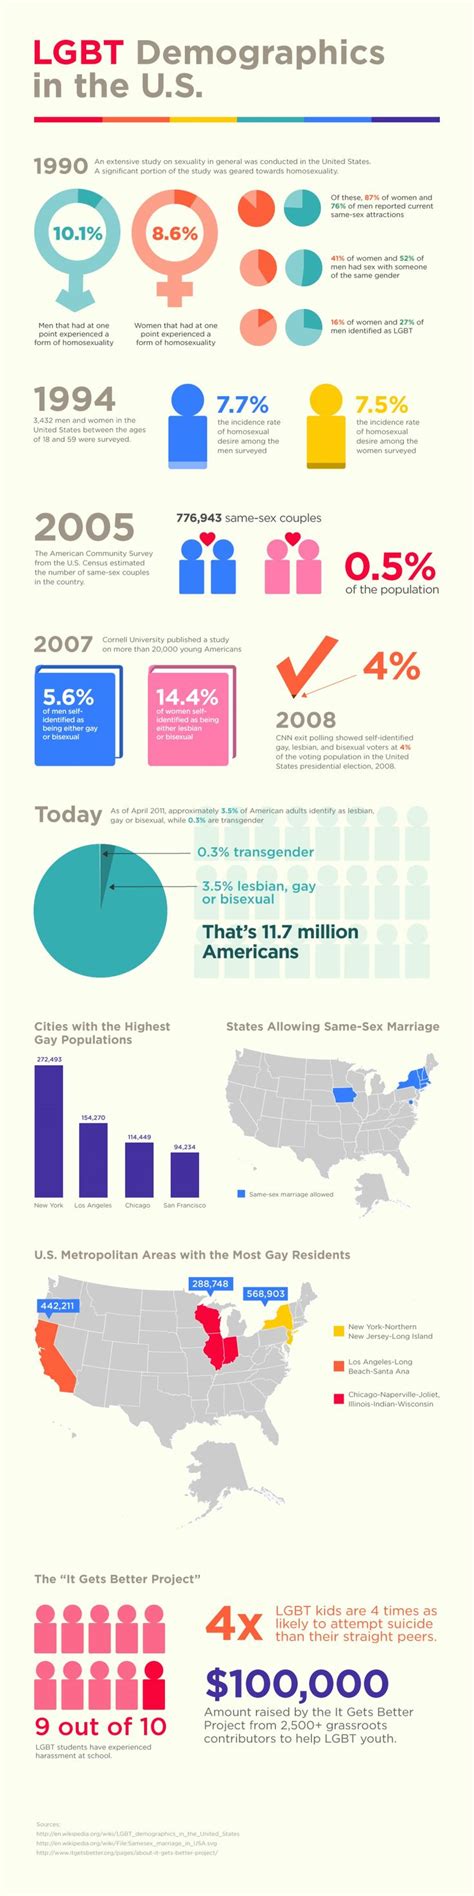 17 Best Images About Lgbt Infographic On Pinterest Romantic Sex Ed